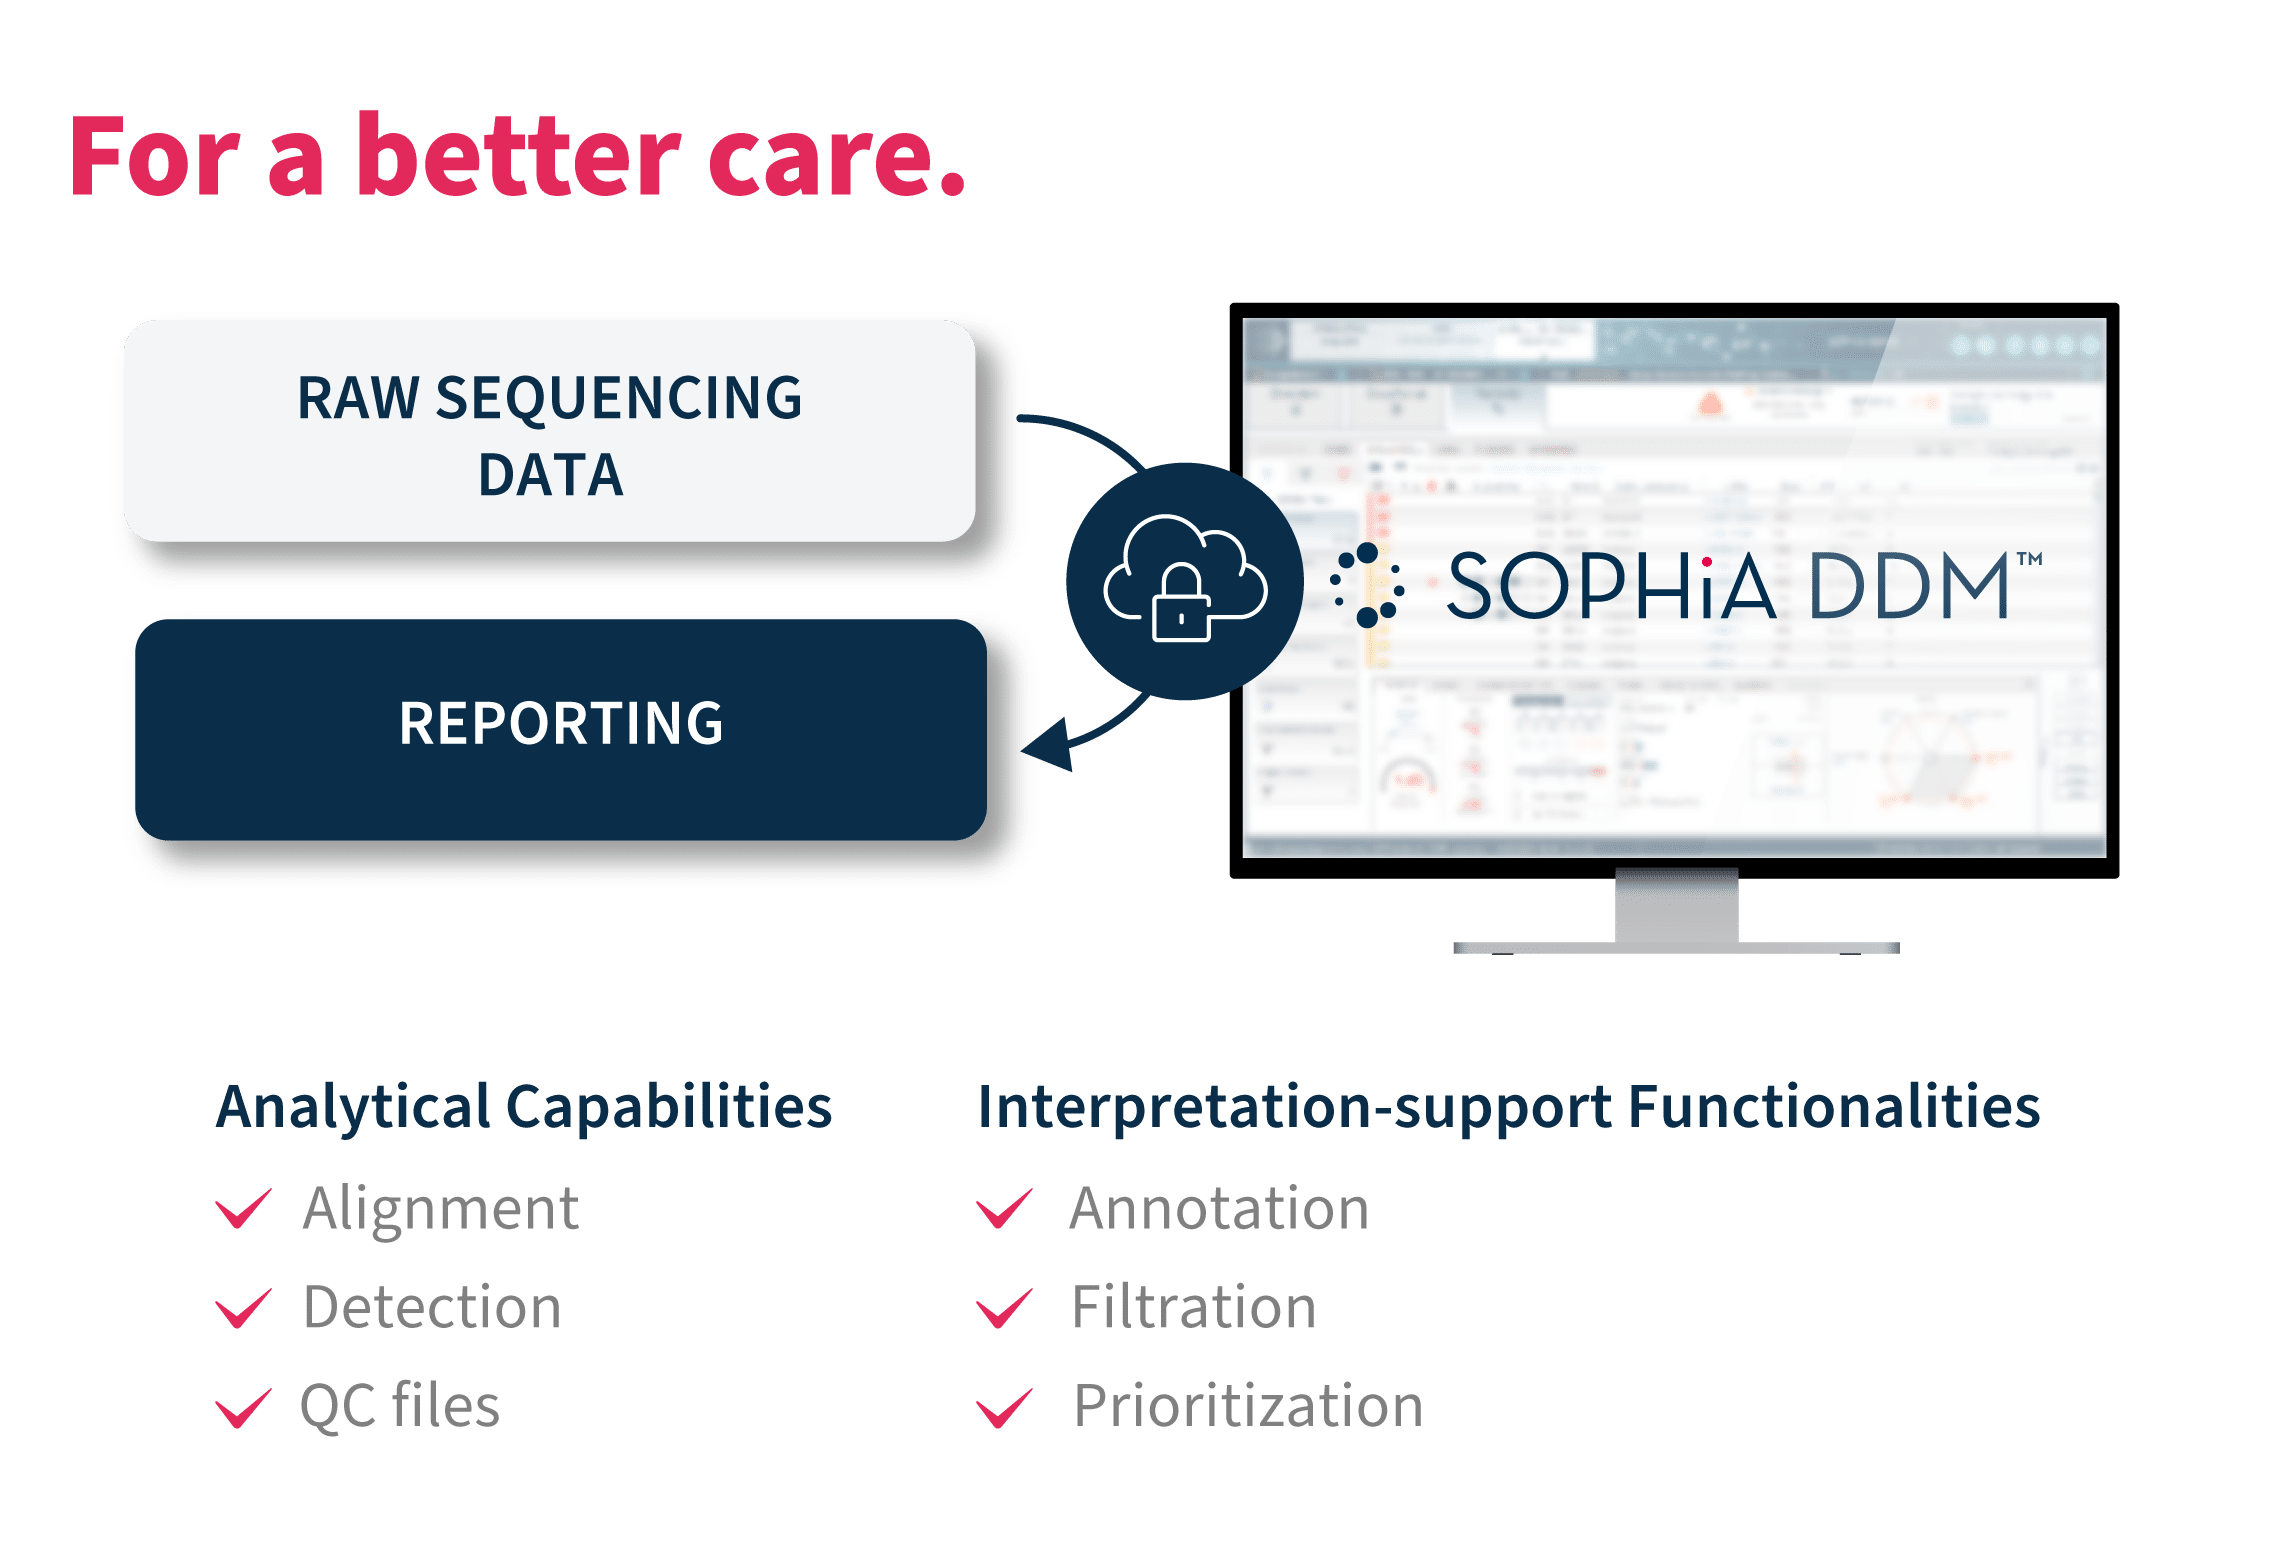 A universal health data analytics platform for a decentralized approach to healthcare